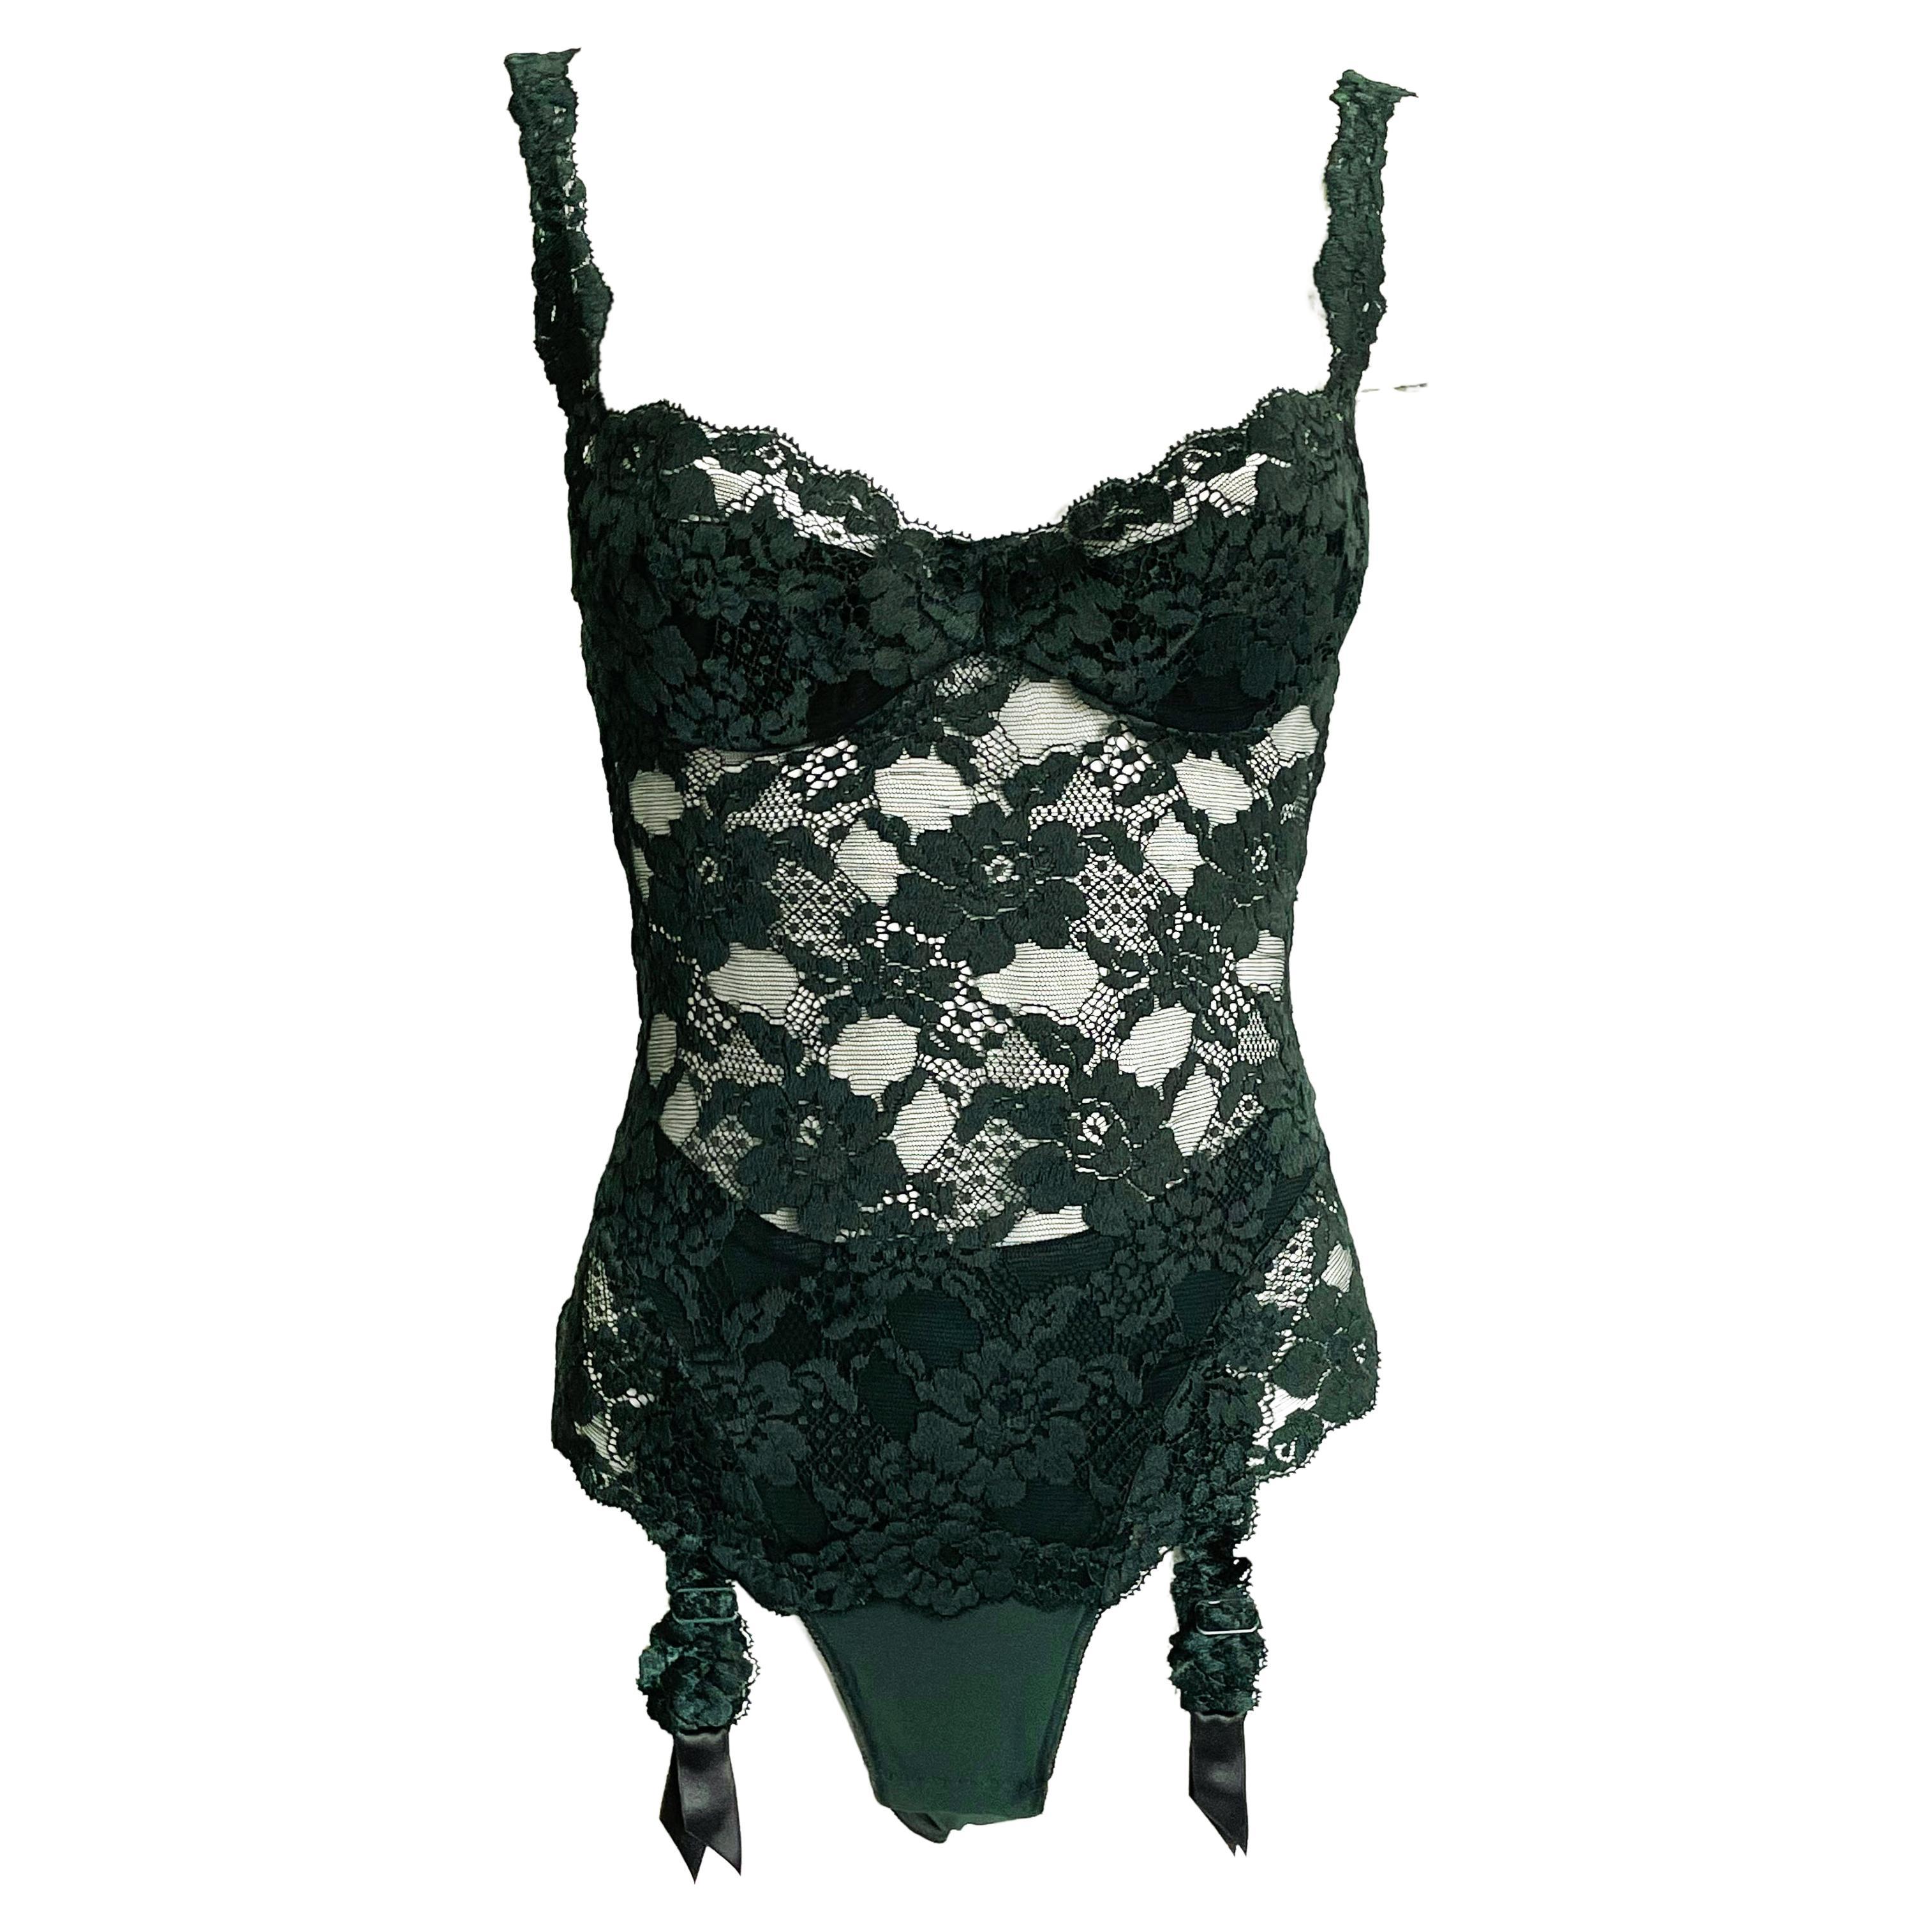 La Perla Body Suit with Garter Straps Floral Lace New With Tags 2003 NOS Size 34